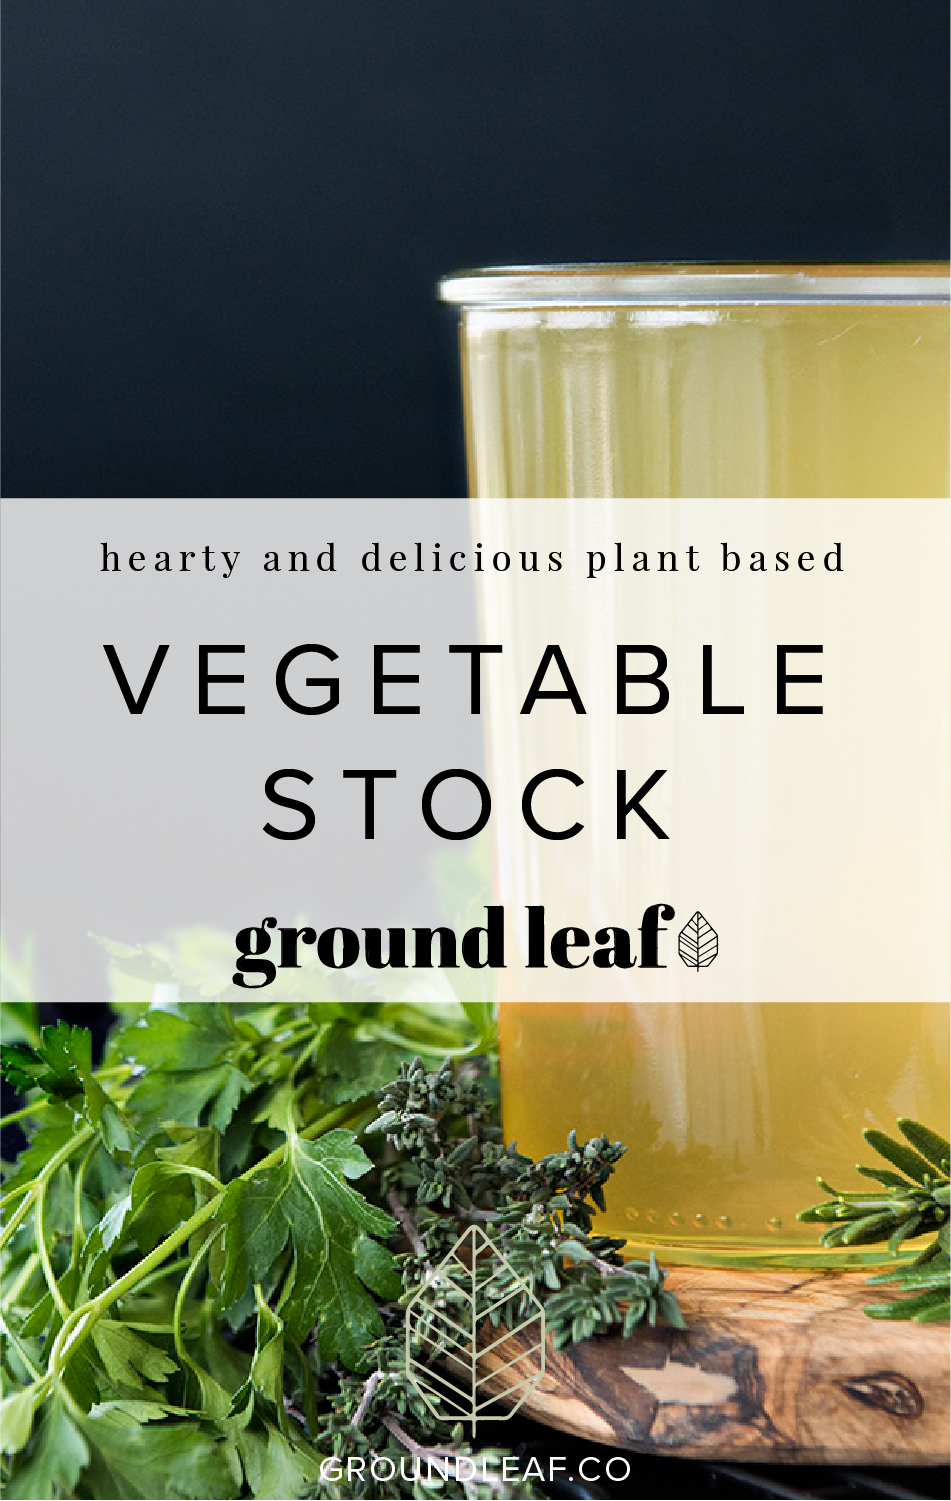 Make your own vegetable stock in your instant pot and have a healthy recipe always ready to go. Video recipe included! | groundleaf.co